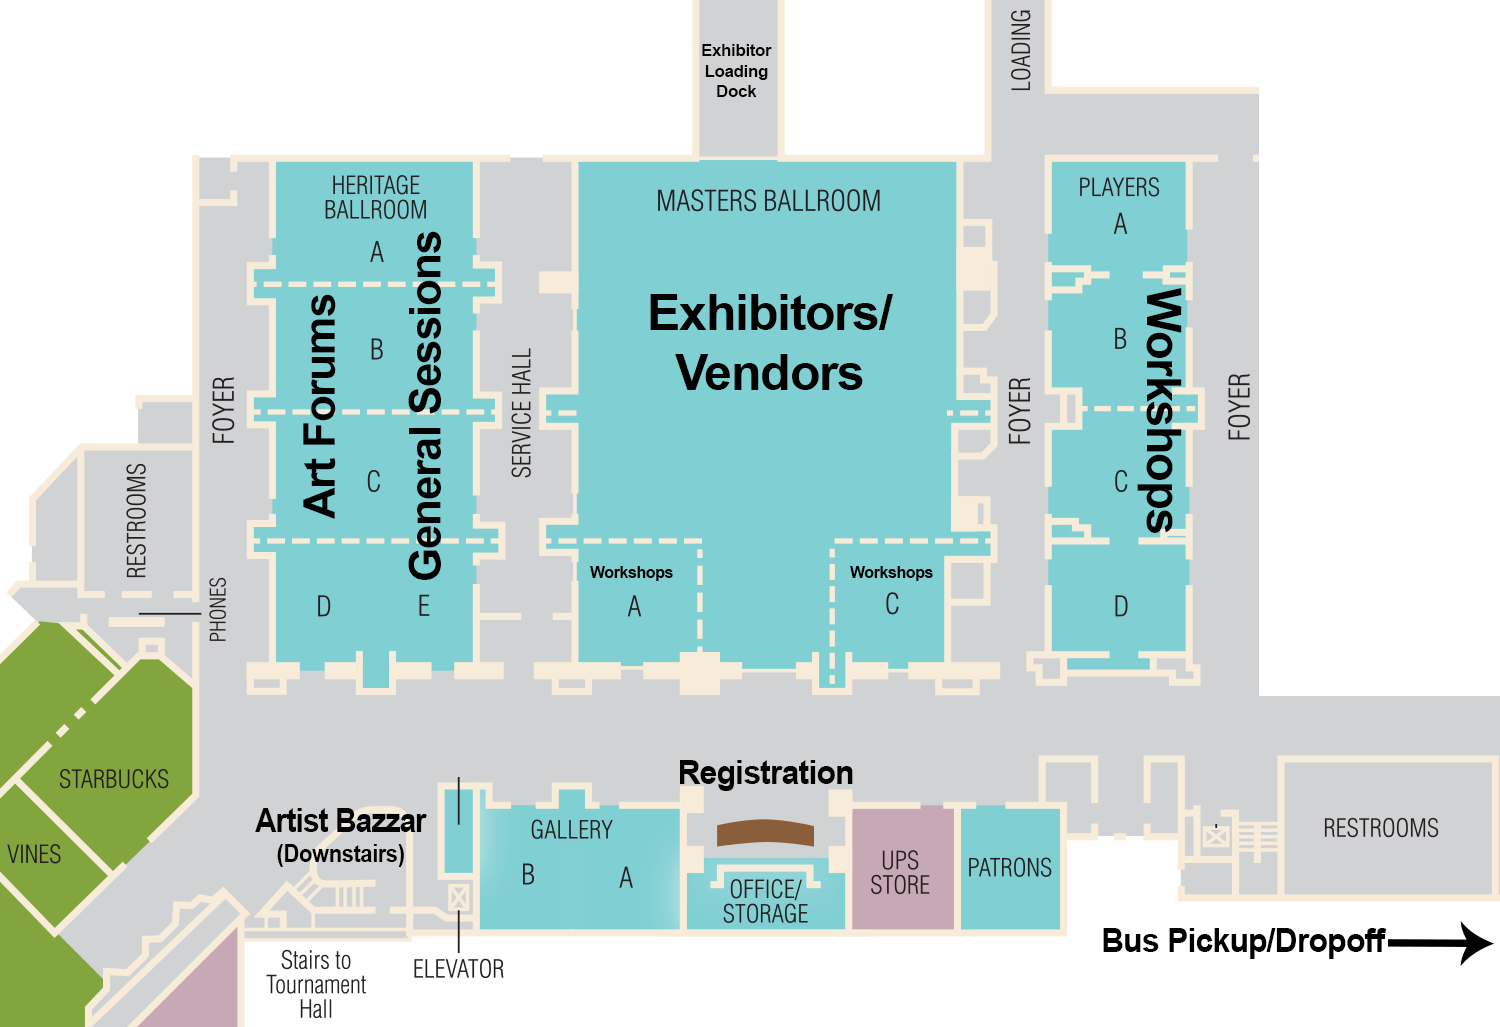 Site Map of Conference Area